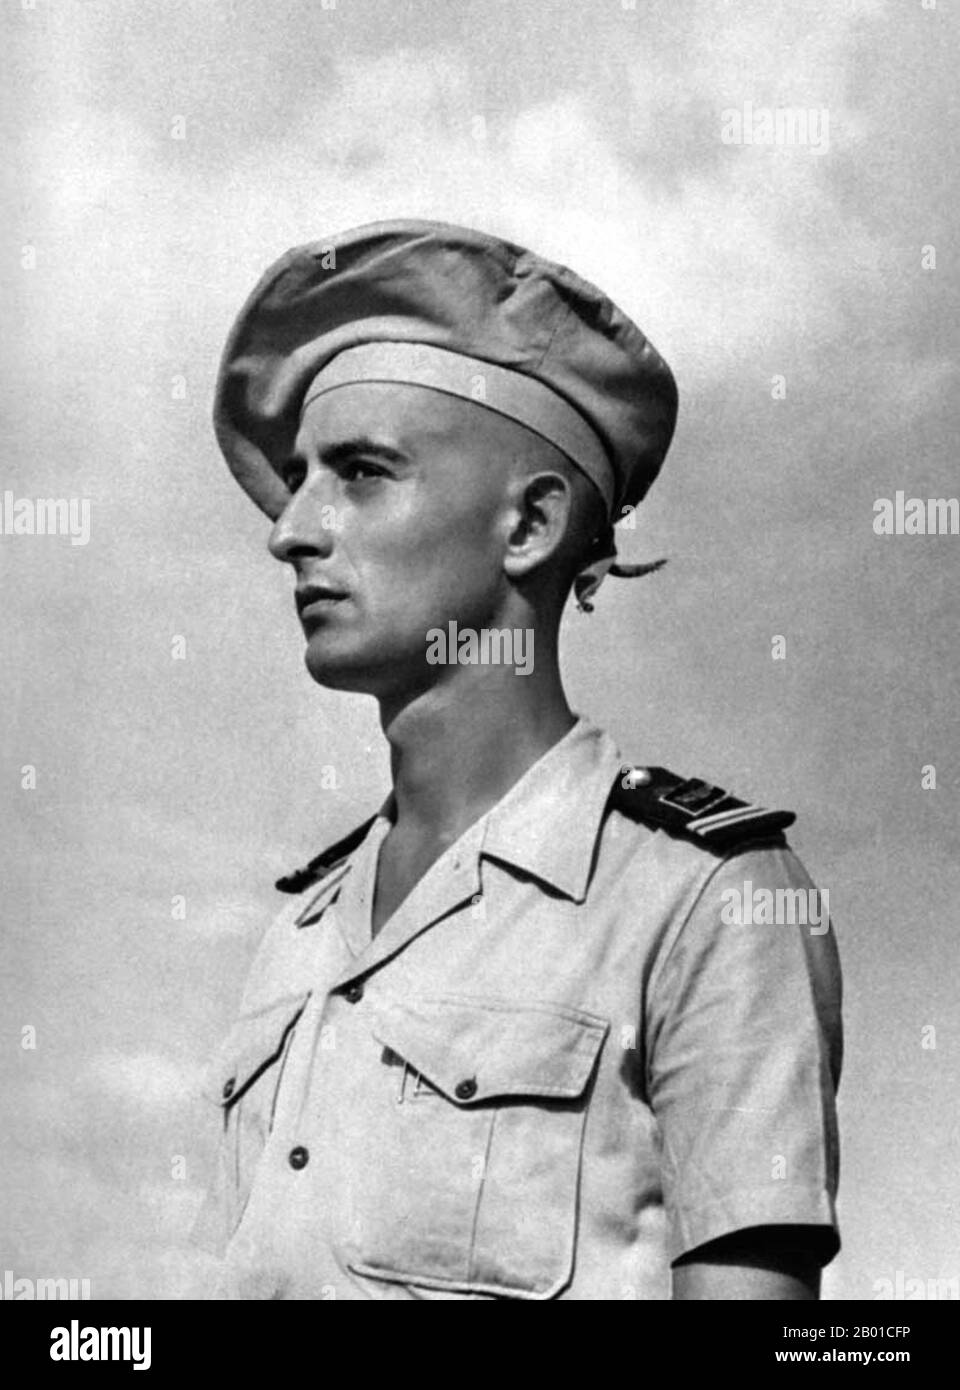 France/Vietnam: Lieutenant Bernard de Lattre de Tassigny (11 February 1928 - 30 May 1951), c. 1950.  Bernard de Lattre de Tassigny was a French Army officer, who fought during World War II and the First Indochina War. Bernard de Lattre received several medals during his military career, including the Médaille militaire. He was killed in action at the age of 23, fighting near Ninh Binh.  At the time of his death, his father, General Jean de Lattre de Tassigny, was the overall commander of French forces in Indochina. Bernard's death received widespread newspaper coverage. Stock Photo